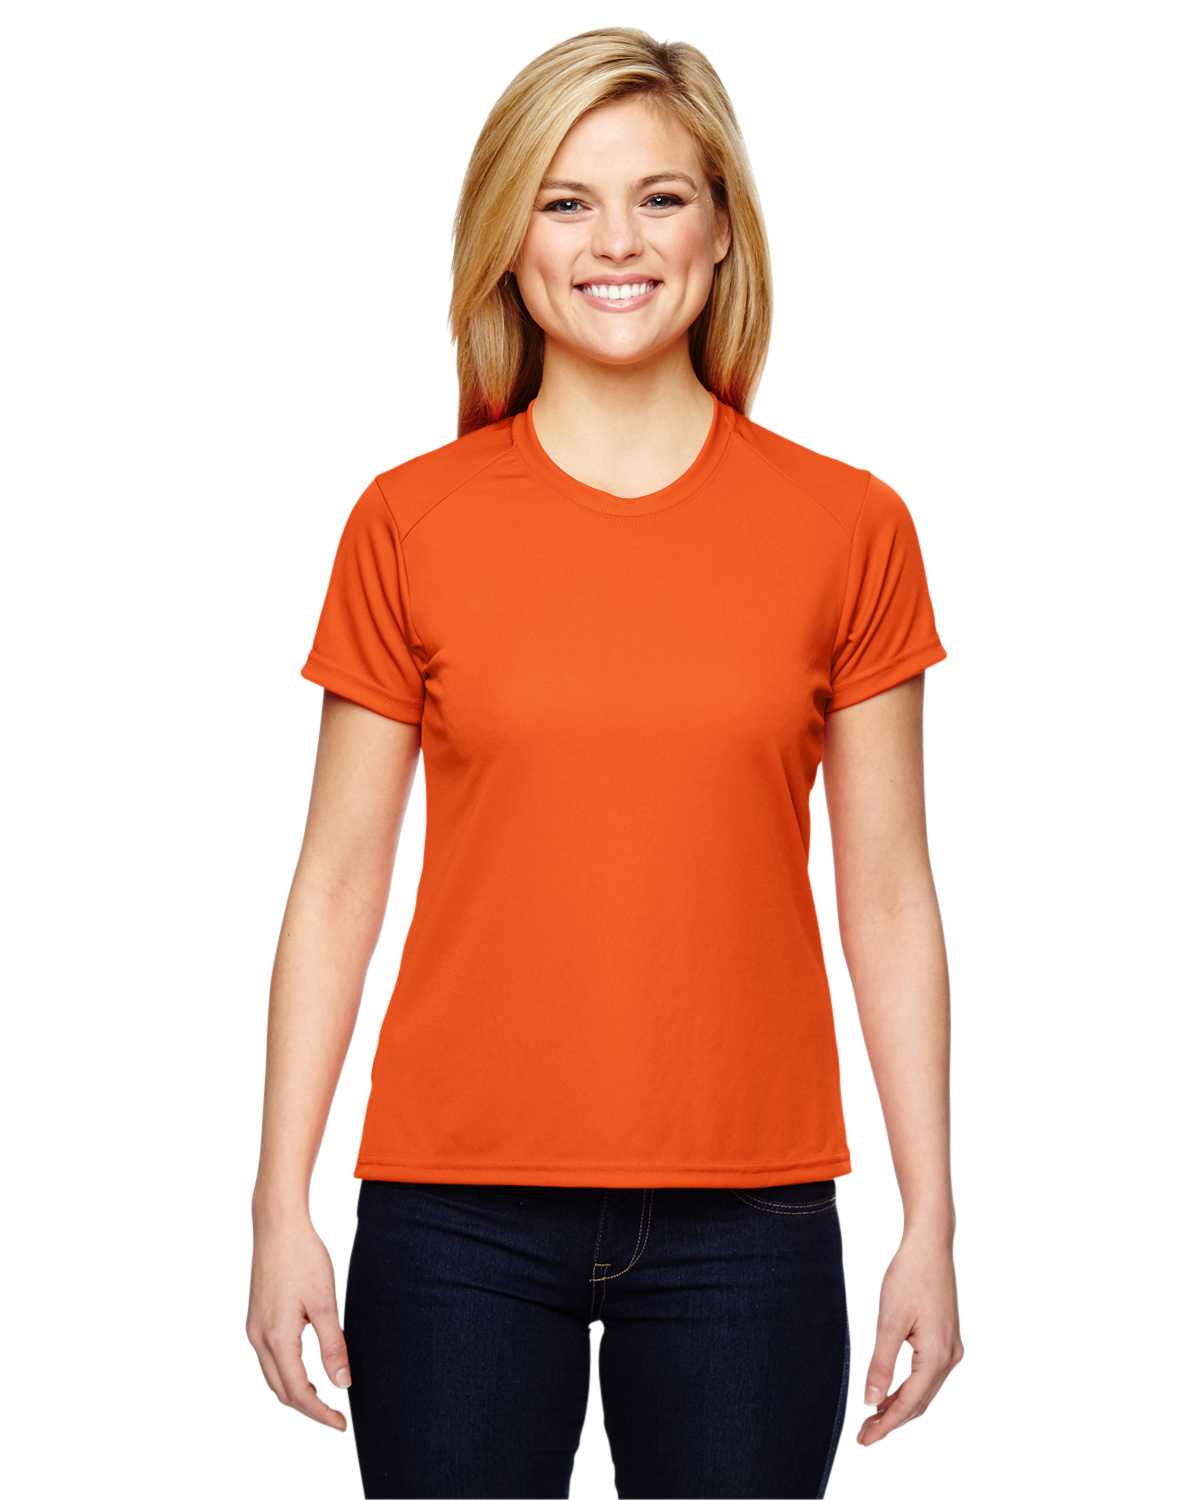 A4 NW3201 Ladies' Short-Sleeve Cooling Performance Crew | ApparelChoice.com